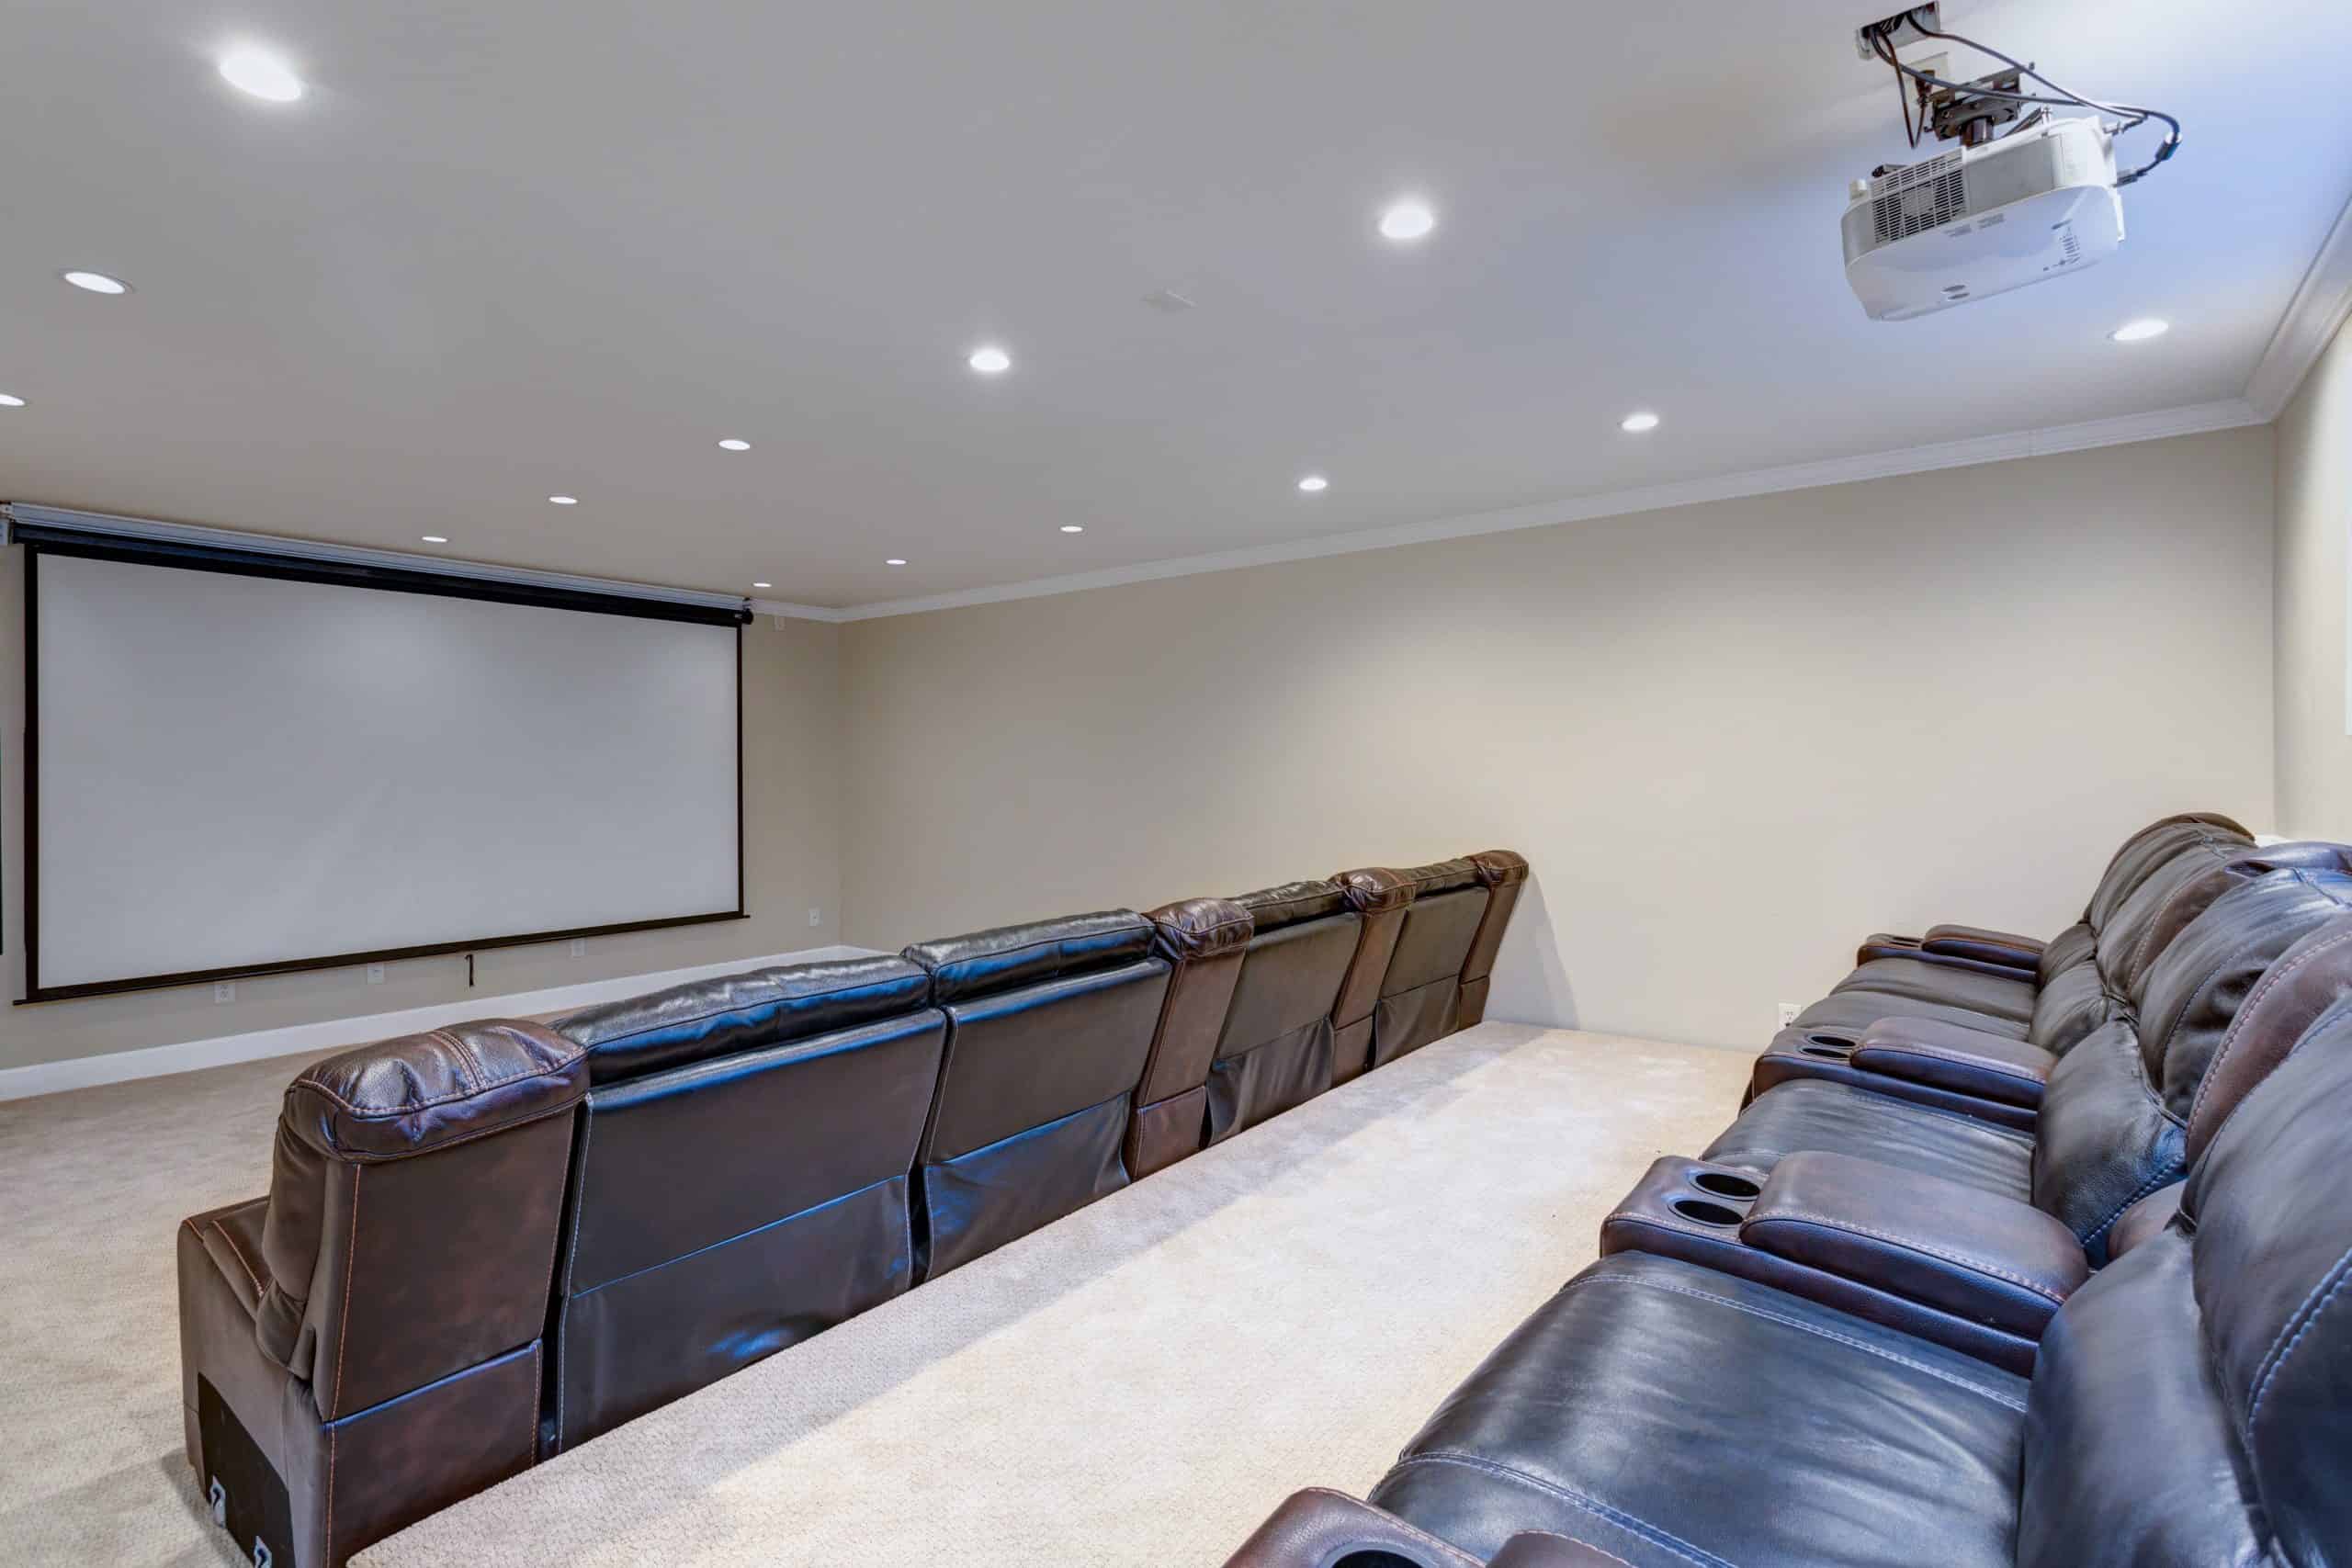 nec projector supplier and casio projector supplier installations